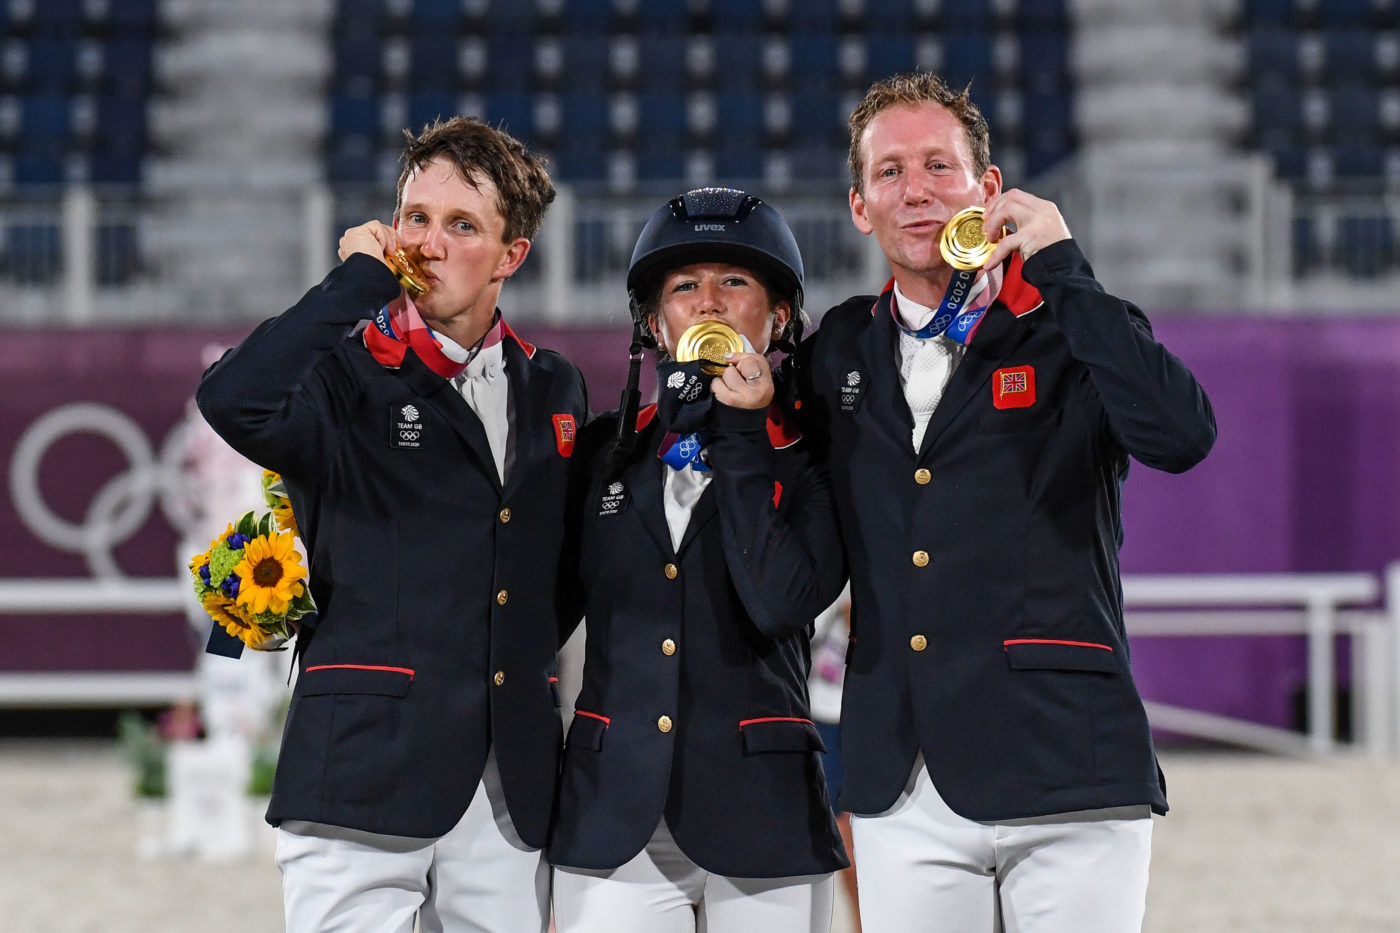 Tom McEwen, Laura Collett, and Oliver Townend, members of Gold Medal Team GBR.